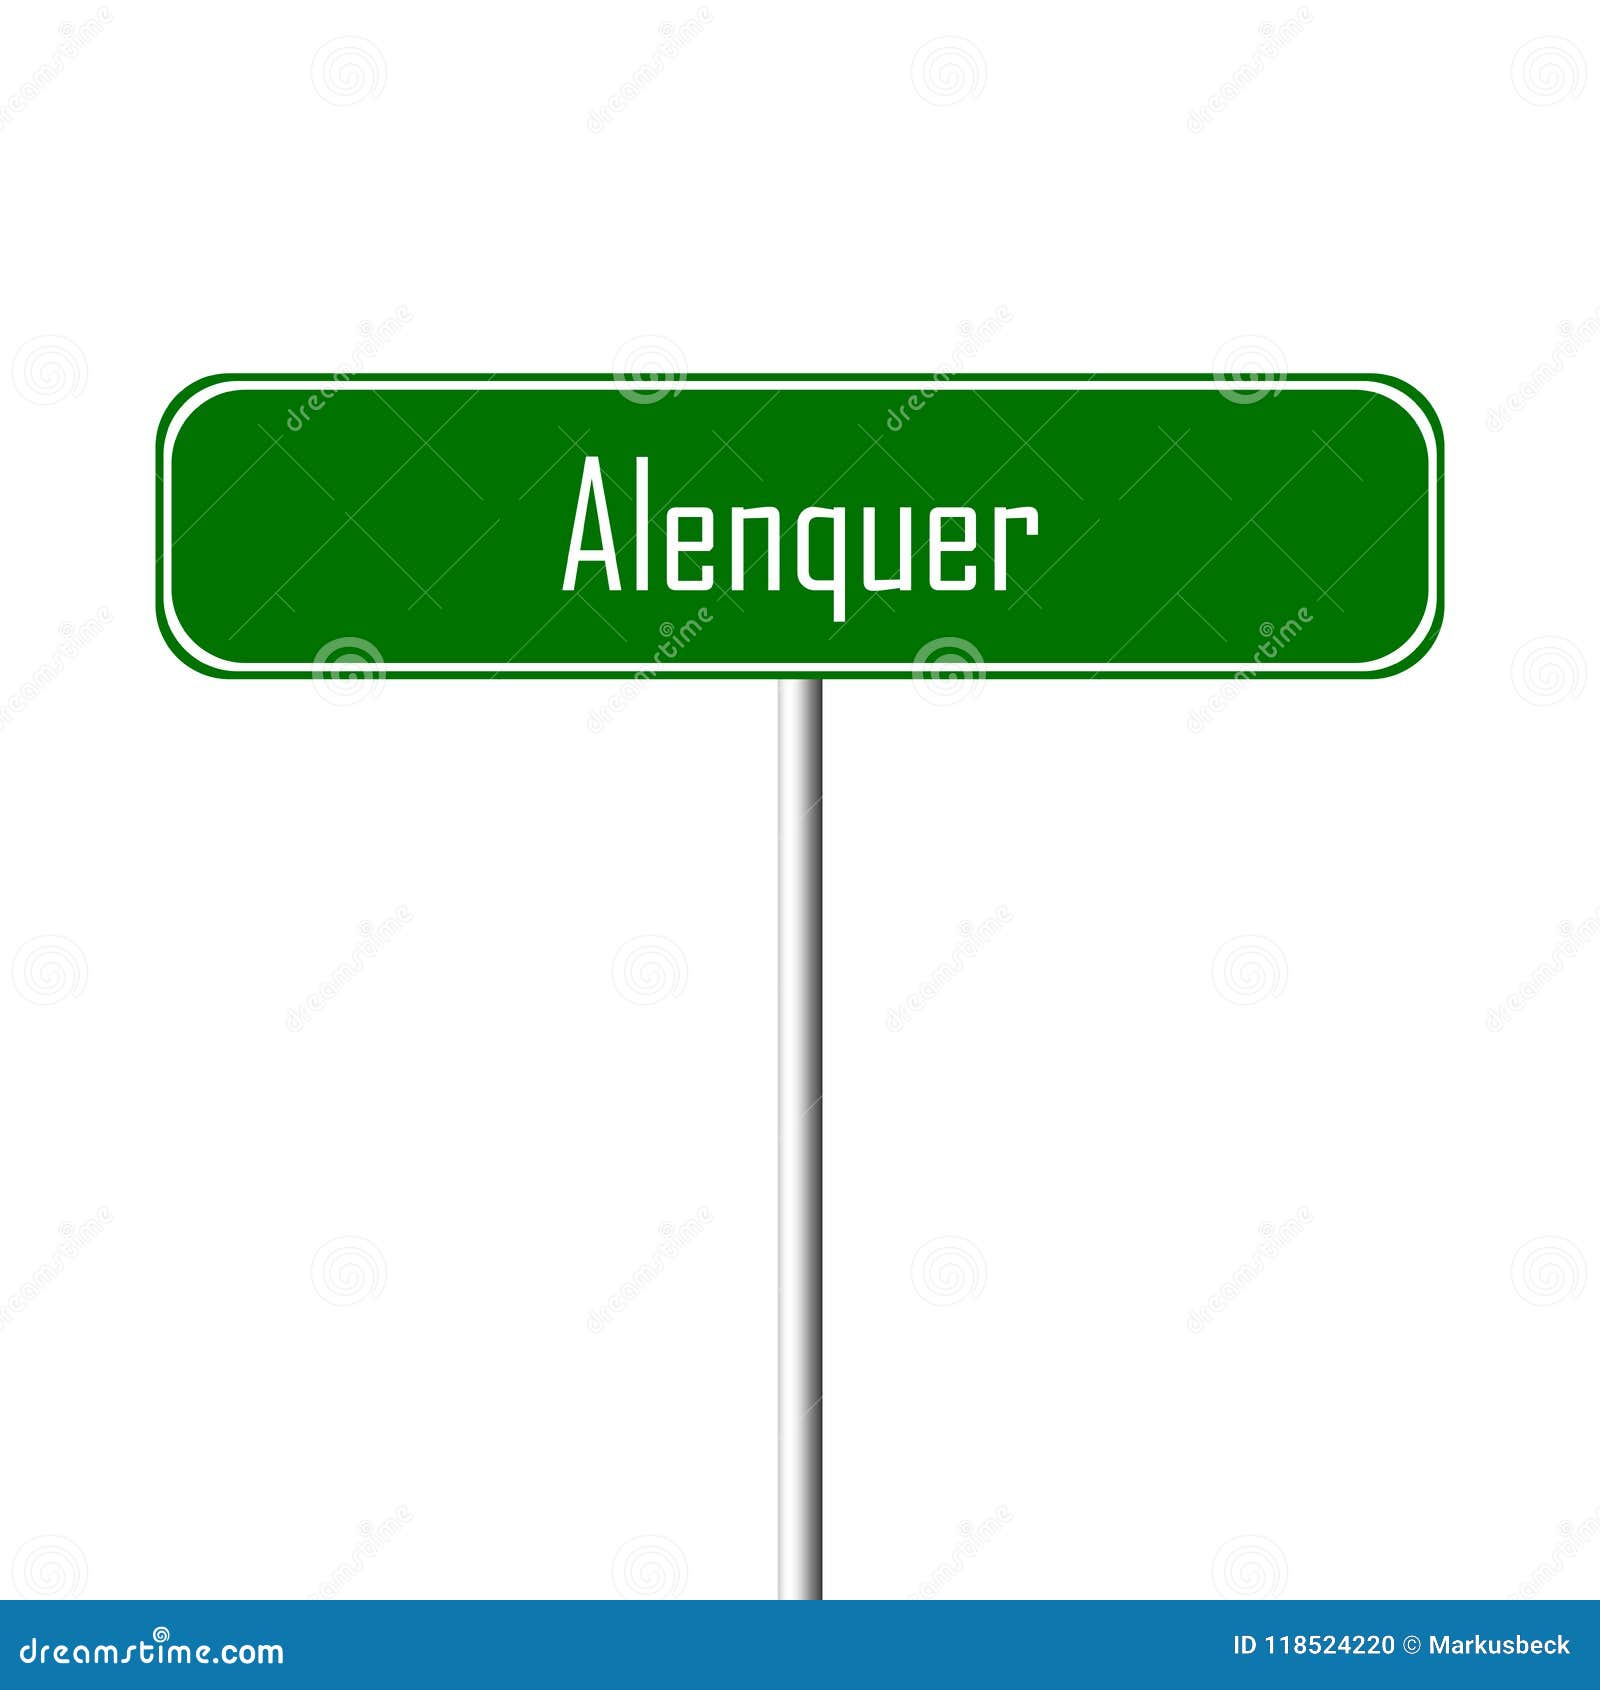 alenquer town sign - place-name sign